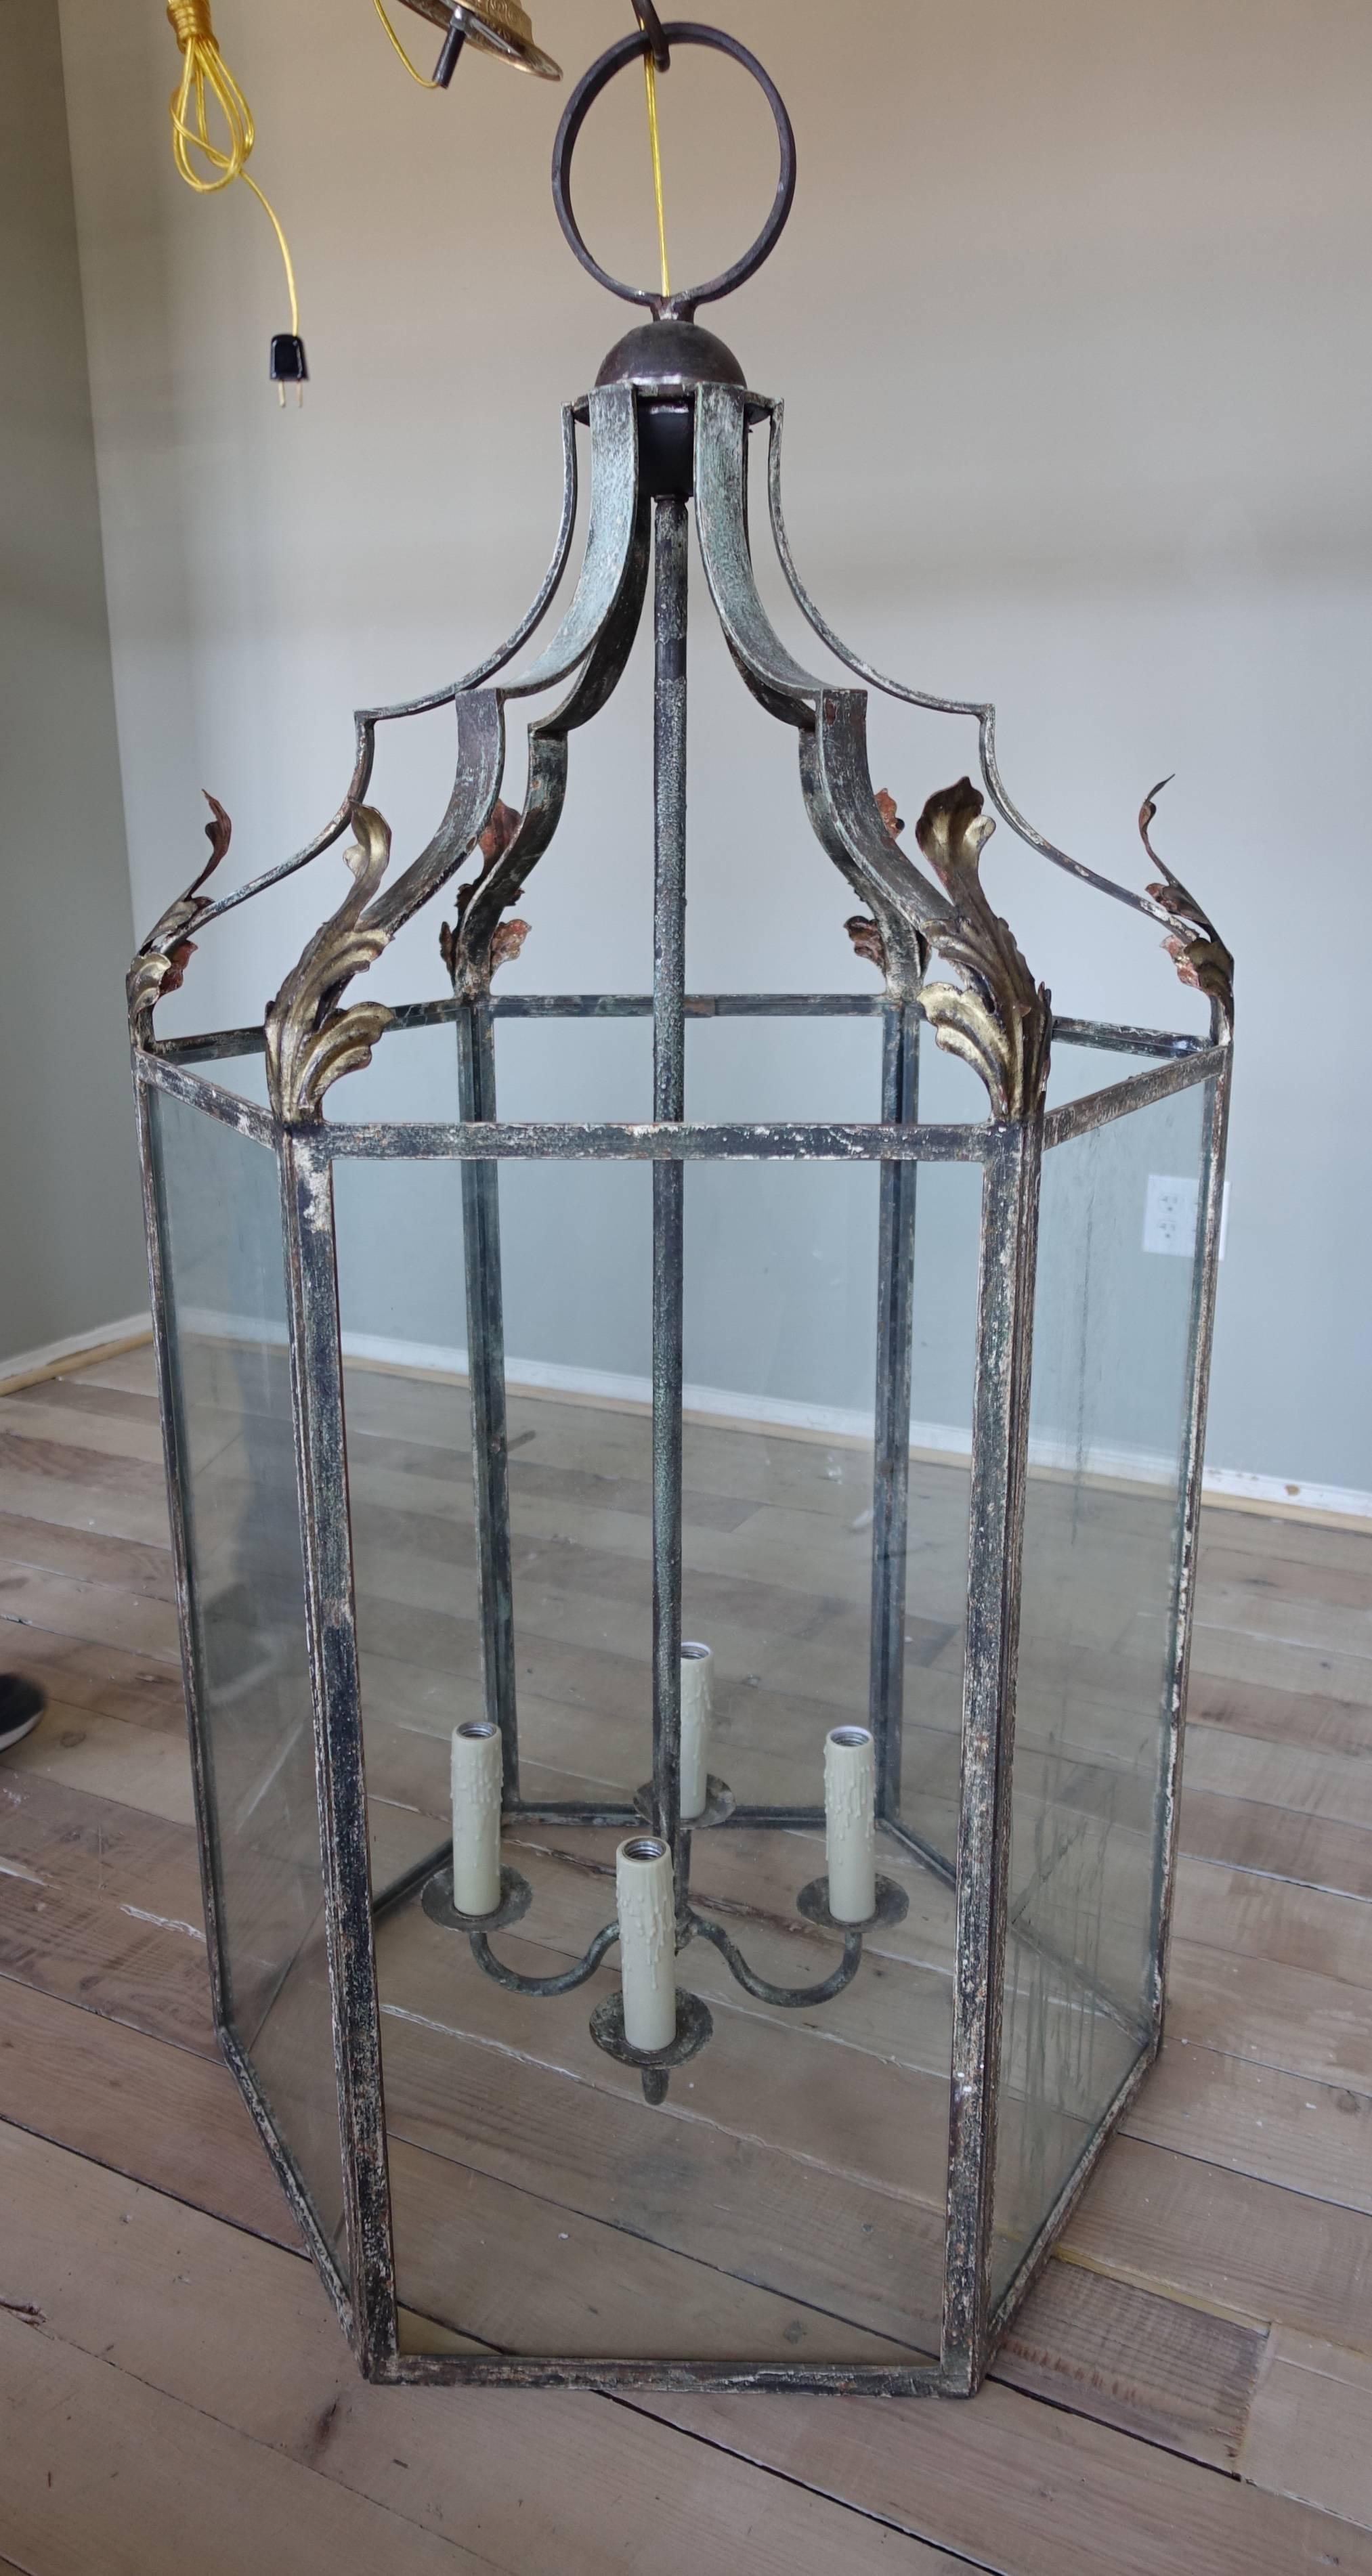 Monumental Italian wrought iron four-light lantern with gilt metal acanthus leaf detail. Distressed finish. Newly rewired with chain and canopy included.